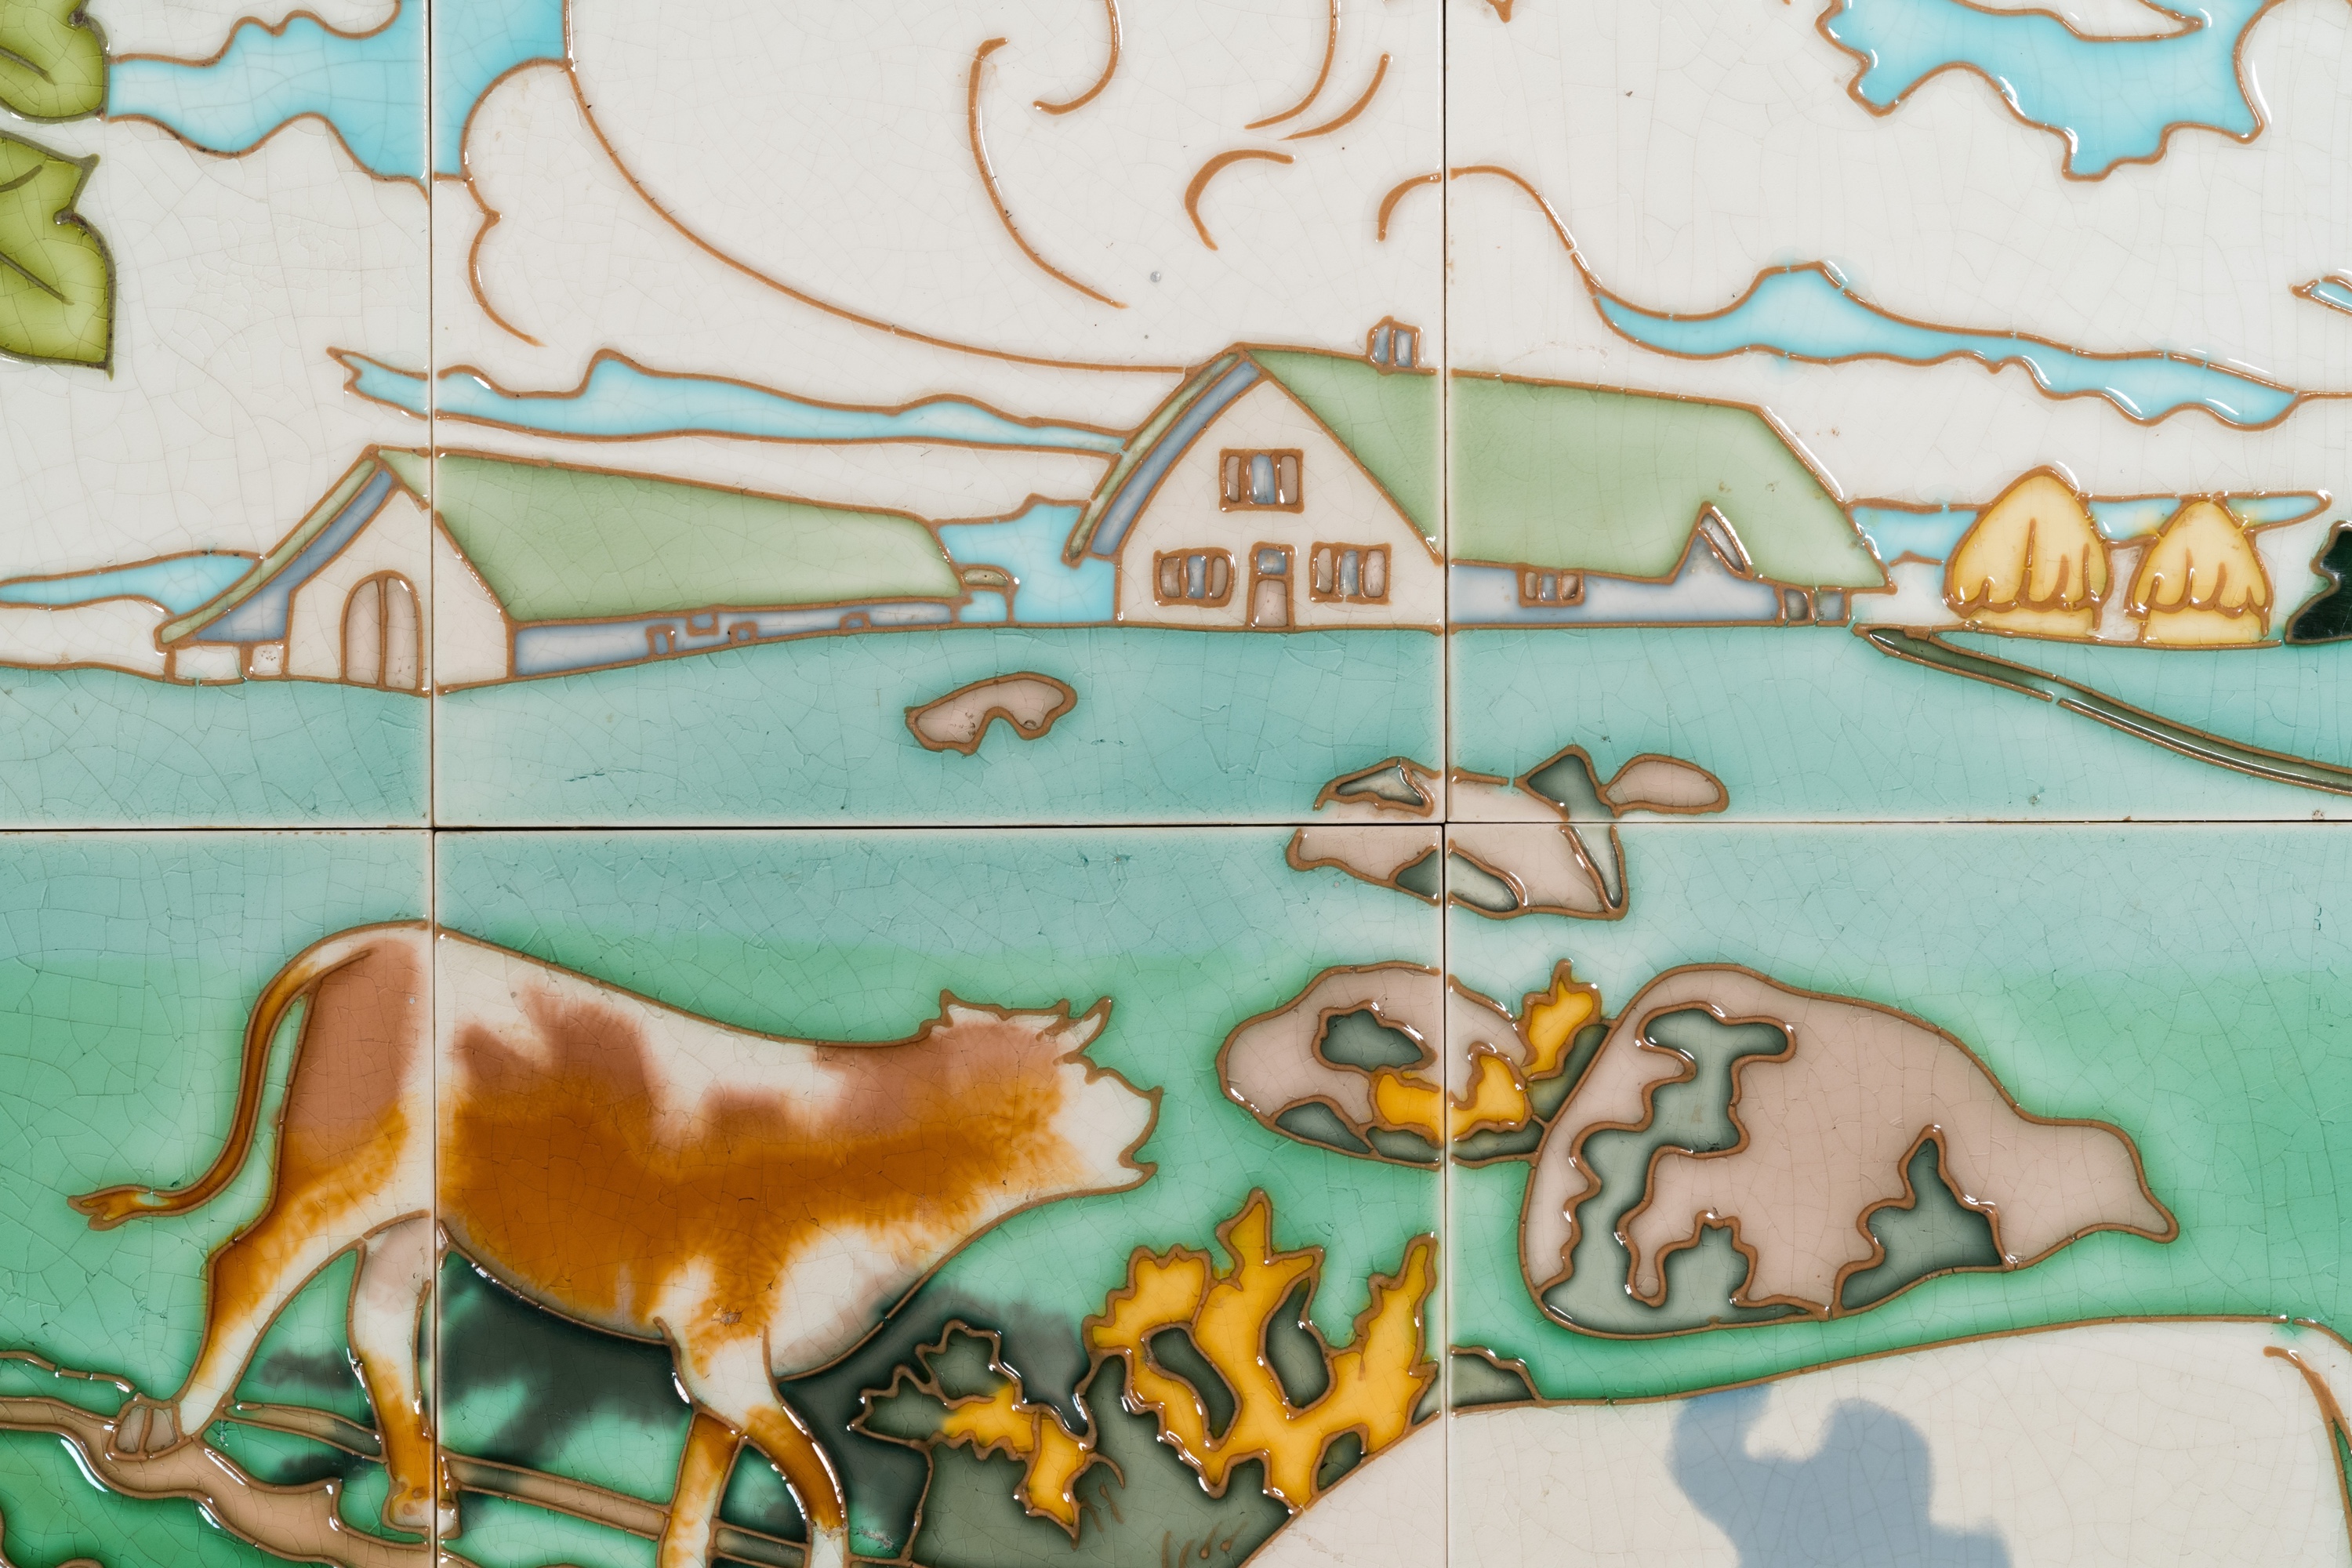 An Art Nouveau tile mural with a shepherdess and her cows in a meadow, Gilliot & Cie., Hemiksem - Image 4 of 4